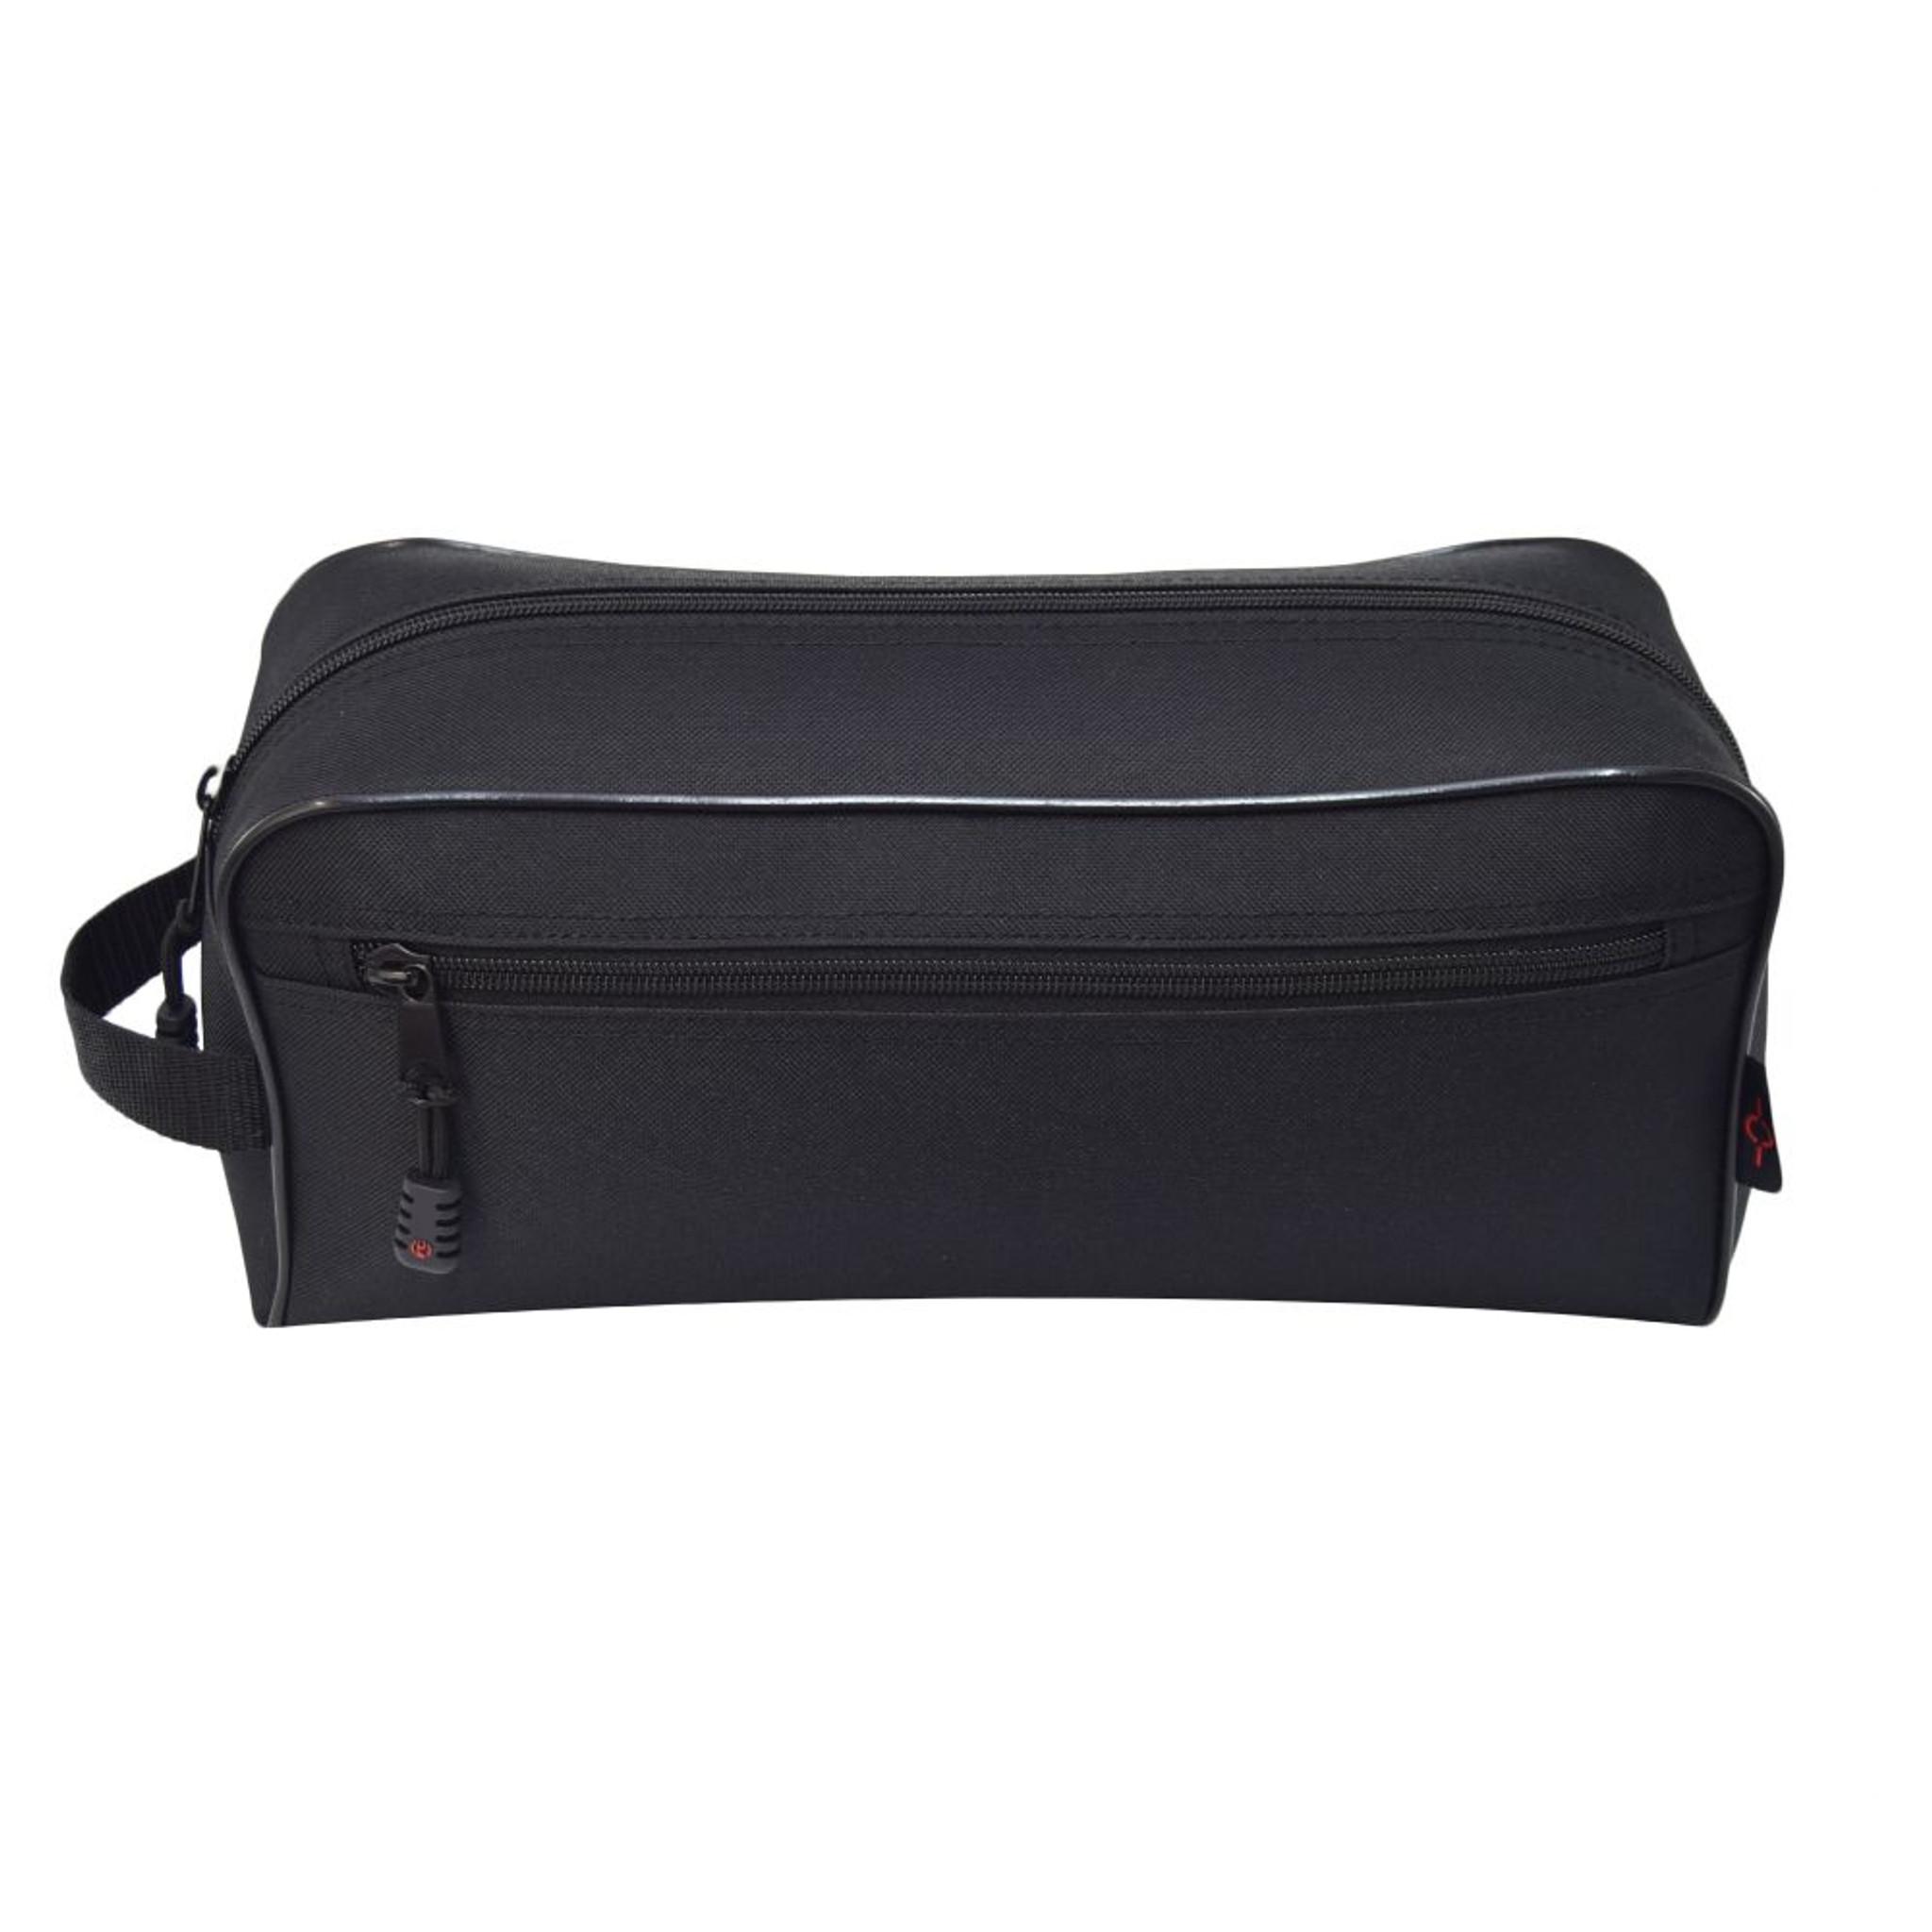 The Large Toiletry Bag